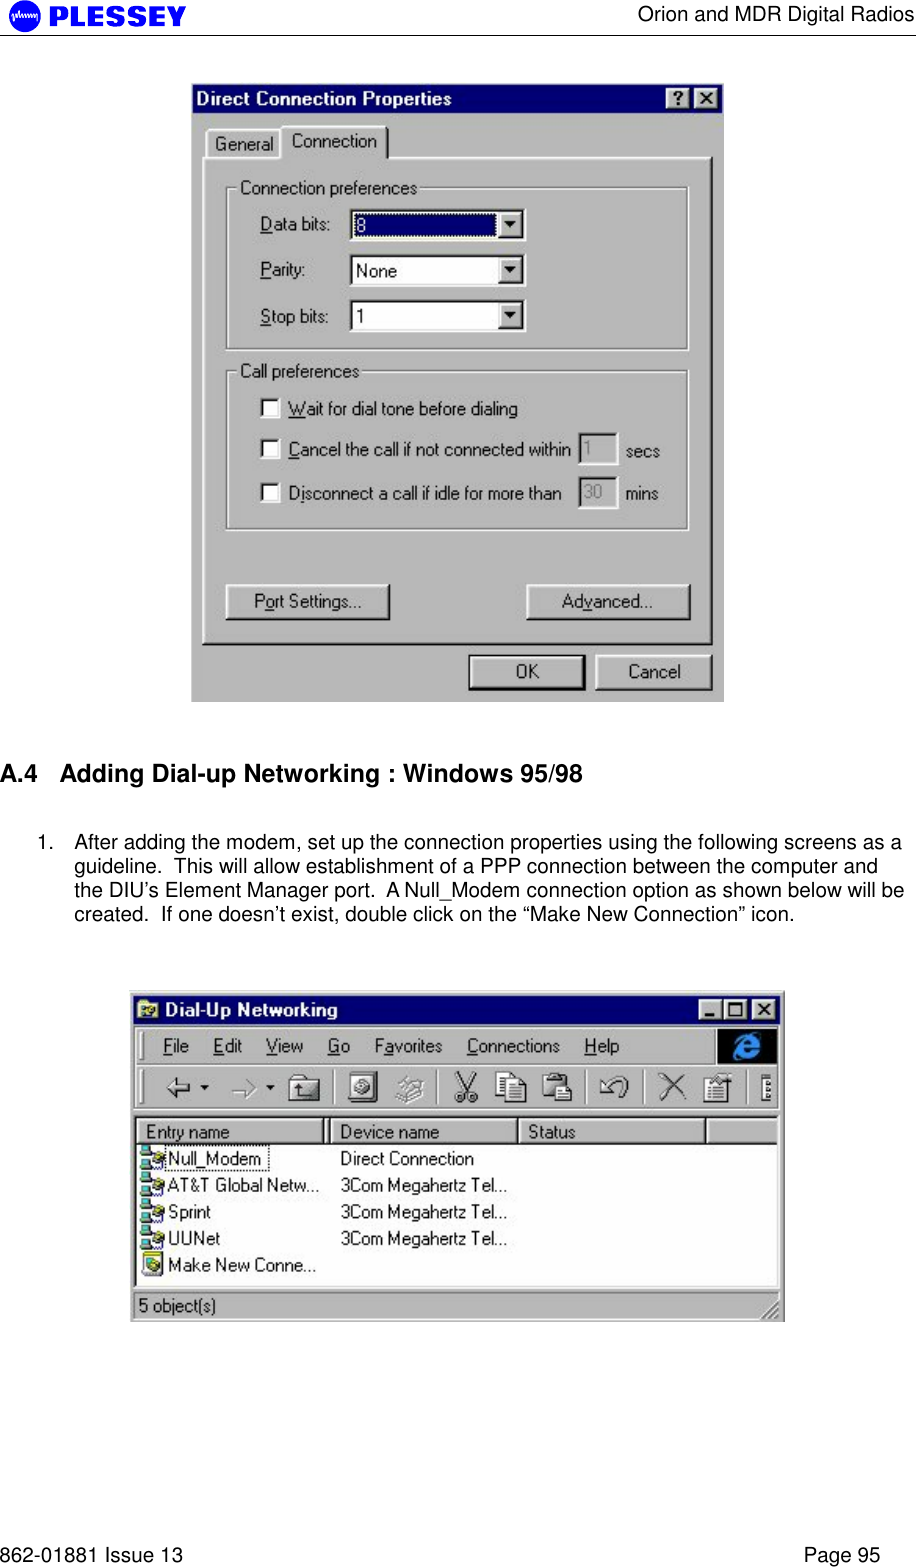      Orion and MDR Digital Radios   862-01881 Issue 13    Page 95    A.4  Adding Dial-up Networking : Windows 95/98  1.  After adding the modem, set up the connection properties using the following screens as a guideline.  This will allow establishment of a PPP connection between the computer and the DIU’s Element Manager port.  A Null_Modem connection option as shown below will be created.  If one doesn’t exist, double click on the “Make New Connection” icon.      